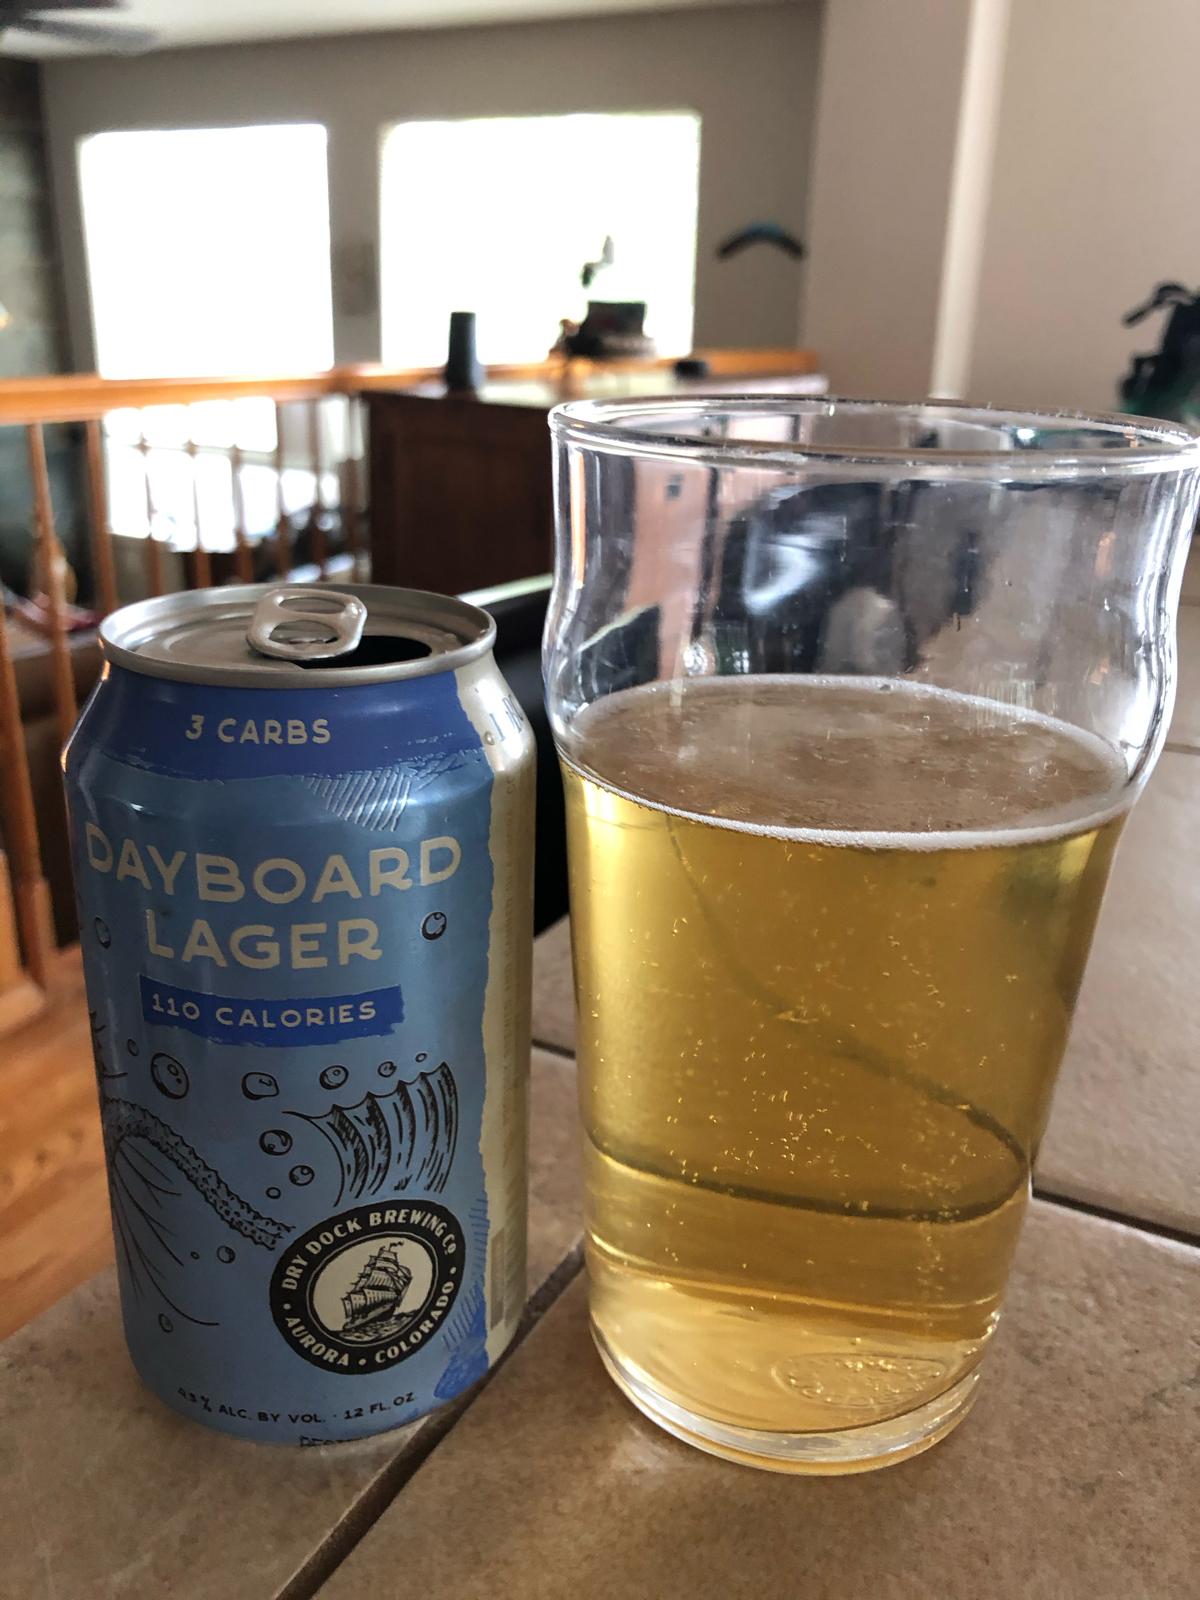 Dayboard Lager